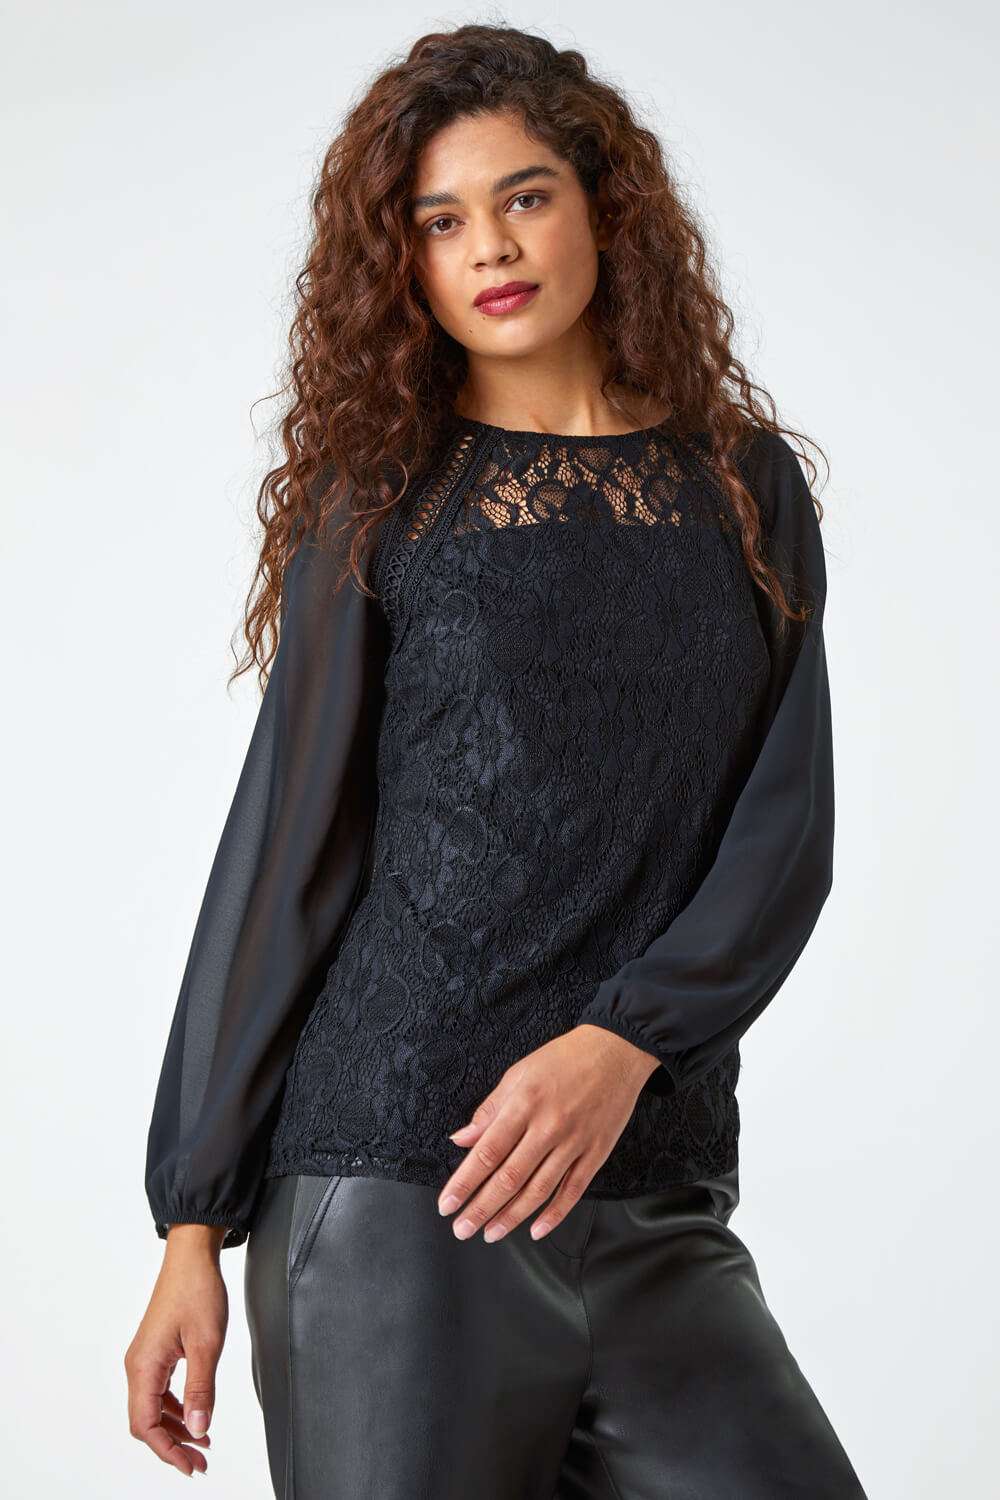 Black Lace Detail Chiffon Sleeve Stretch Top, Image 4 of 5